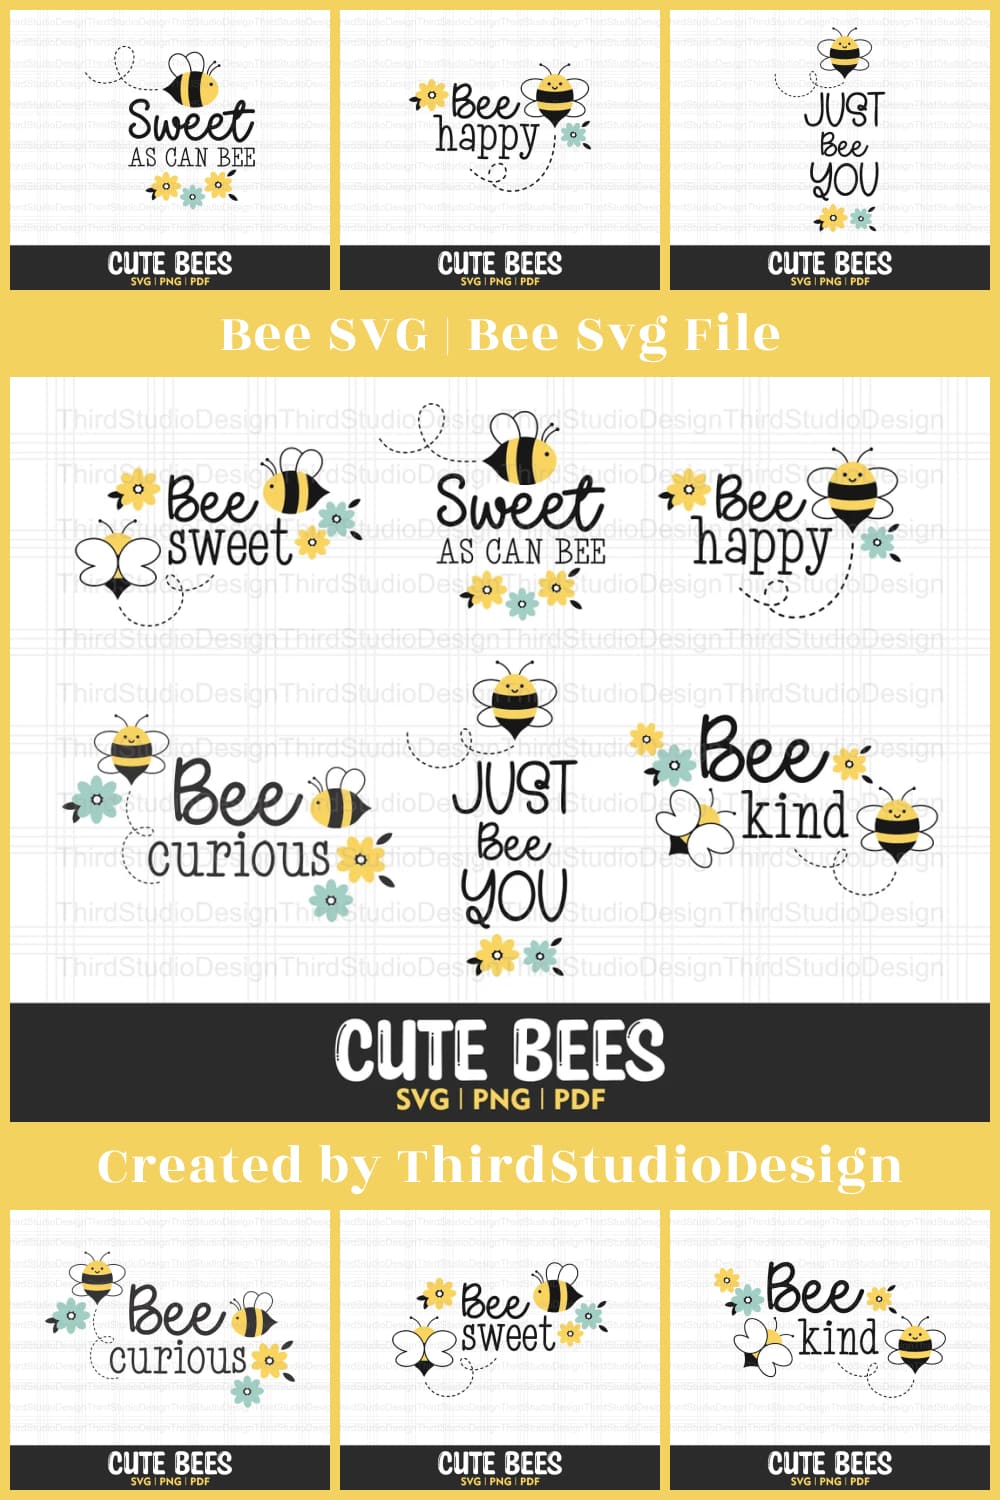 Bumblebee SVG - Honey Bee SVG preview of Pinterest image.